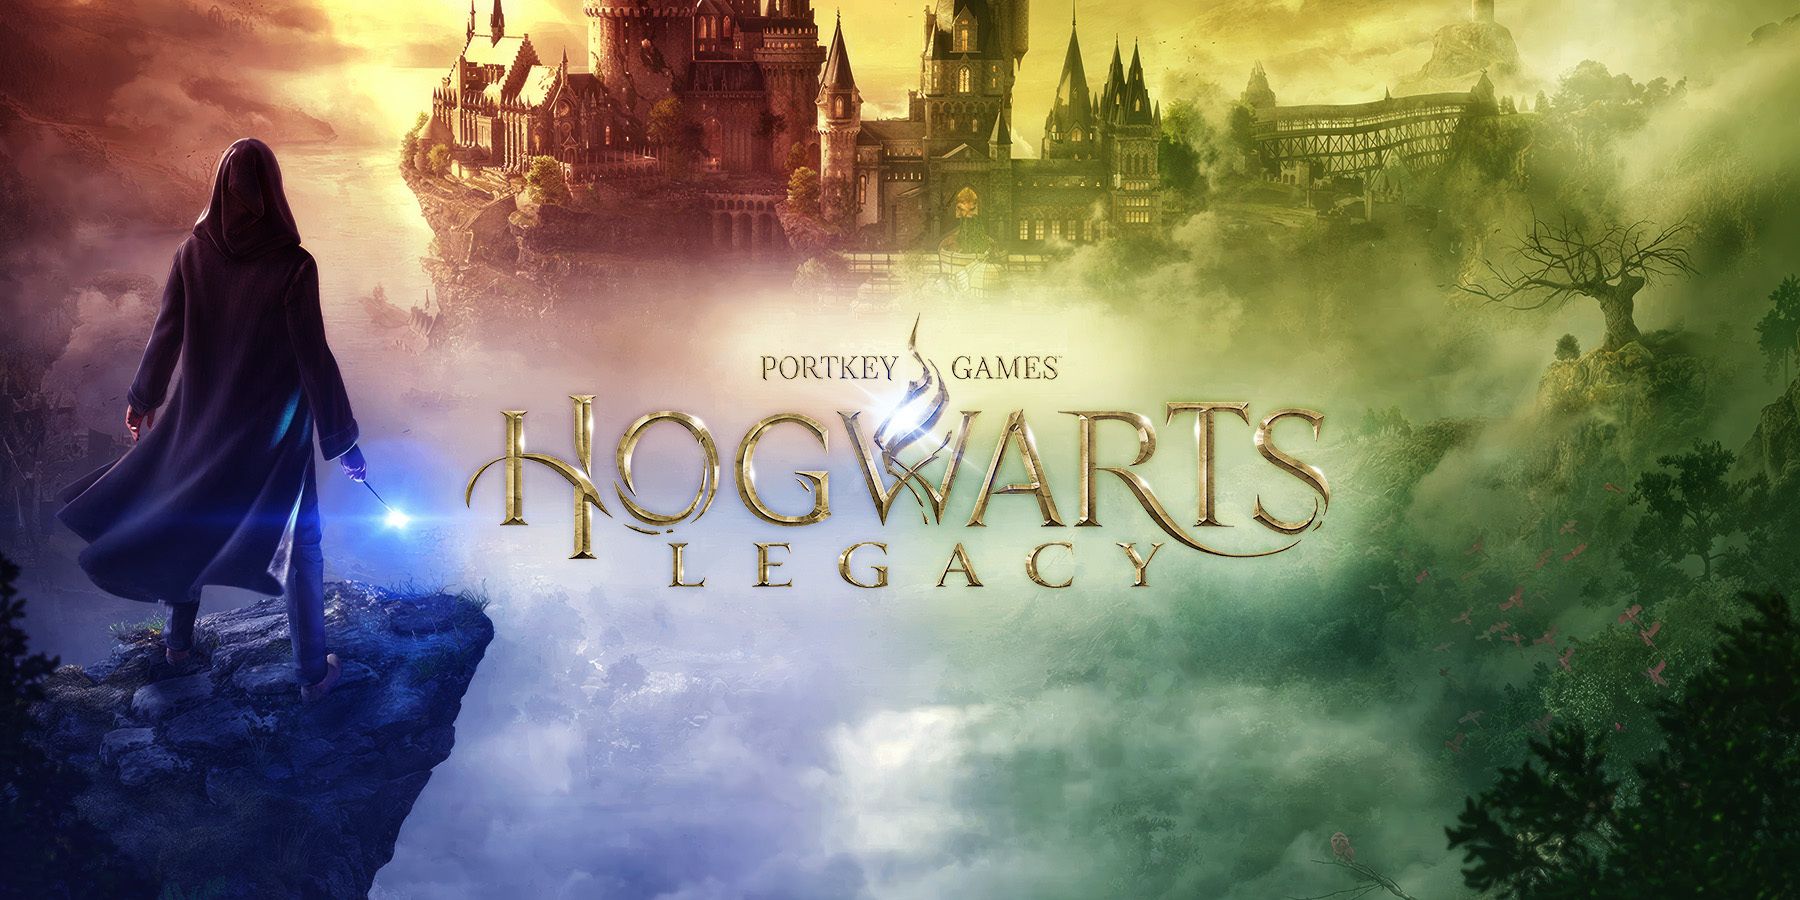 Hogwarts Legacy Has the Ingredients for a Perfect FourPart DLC